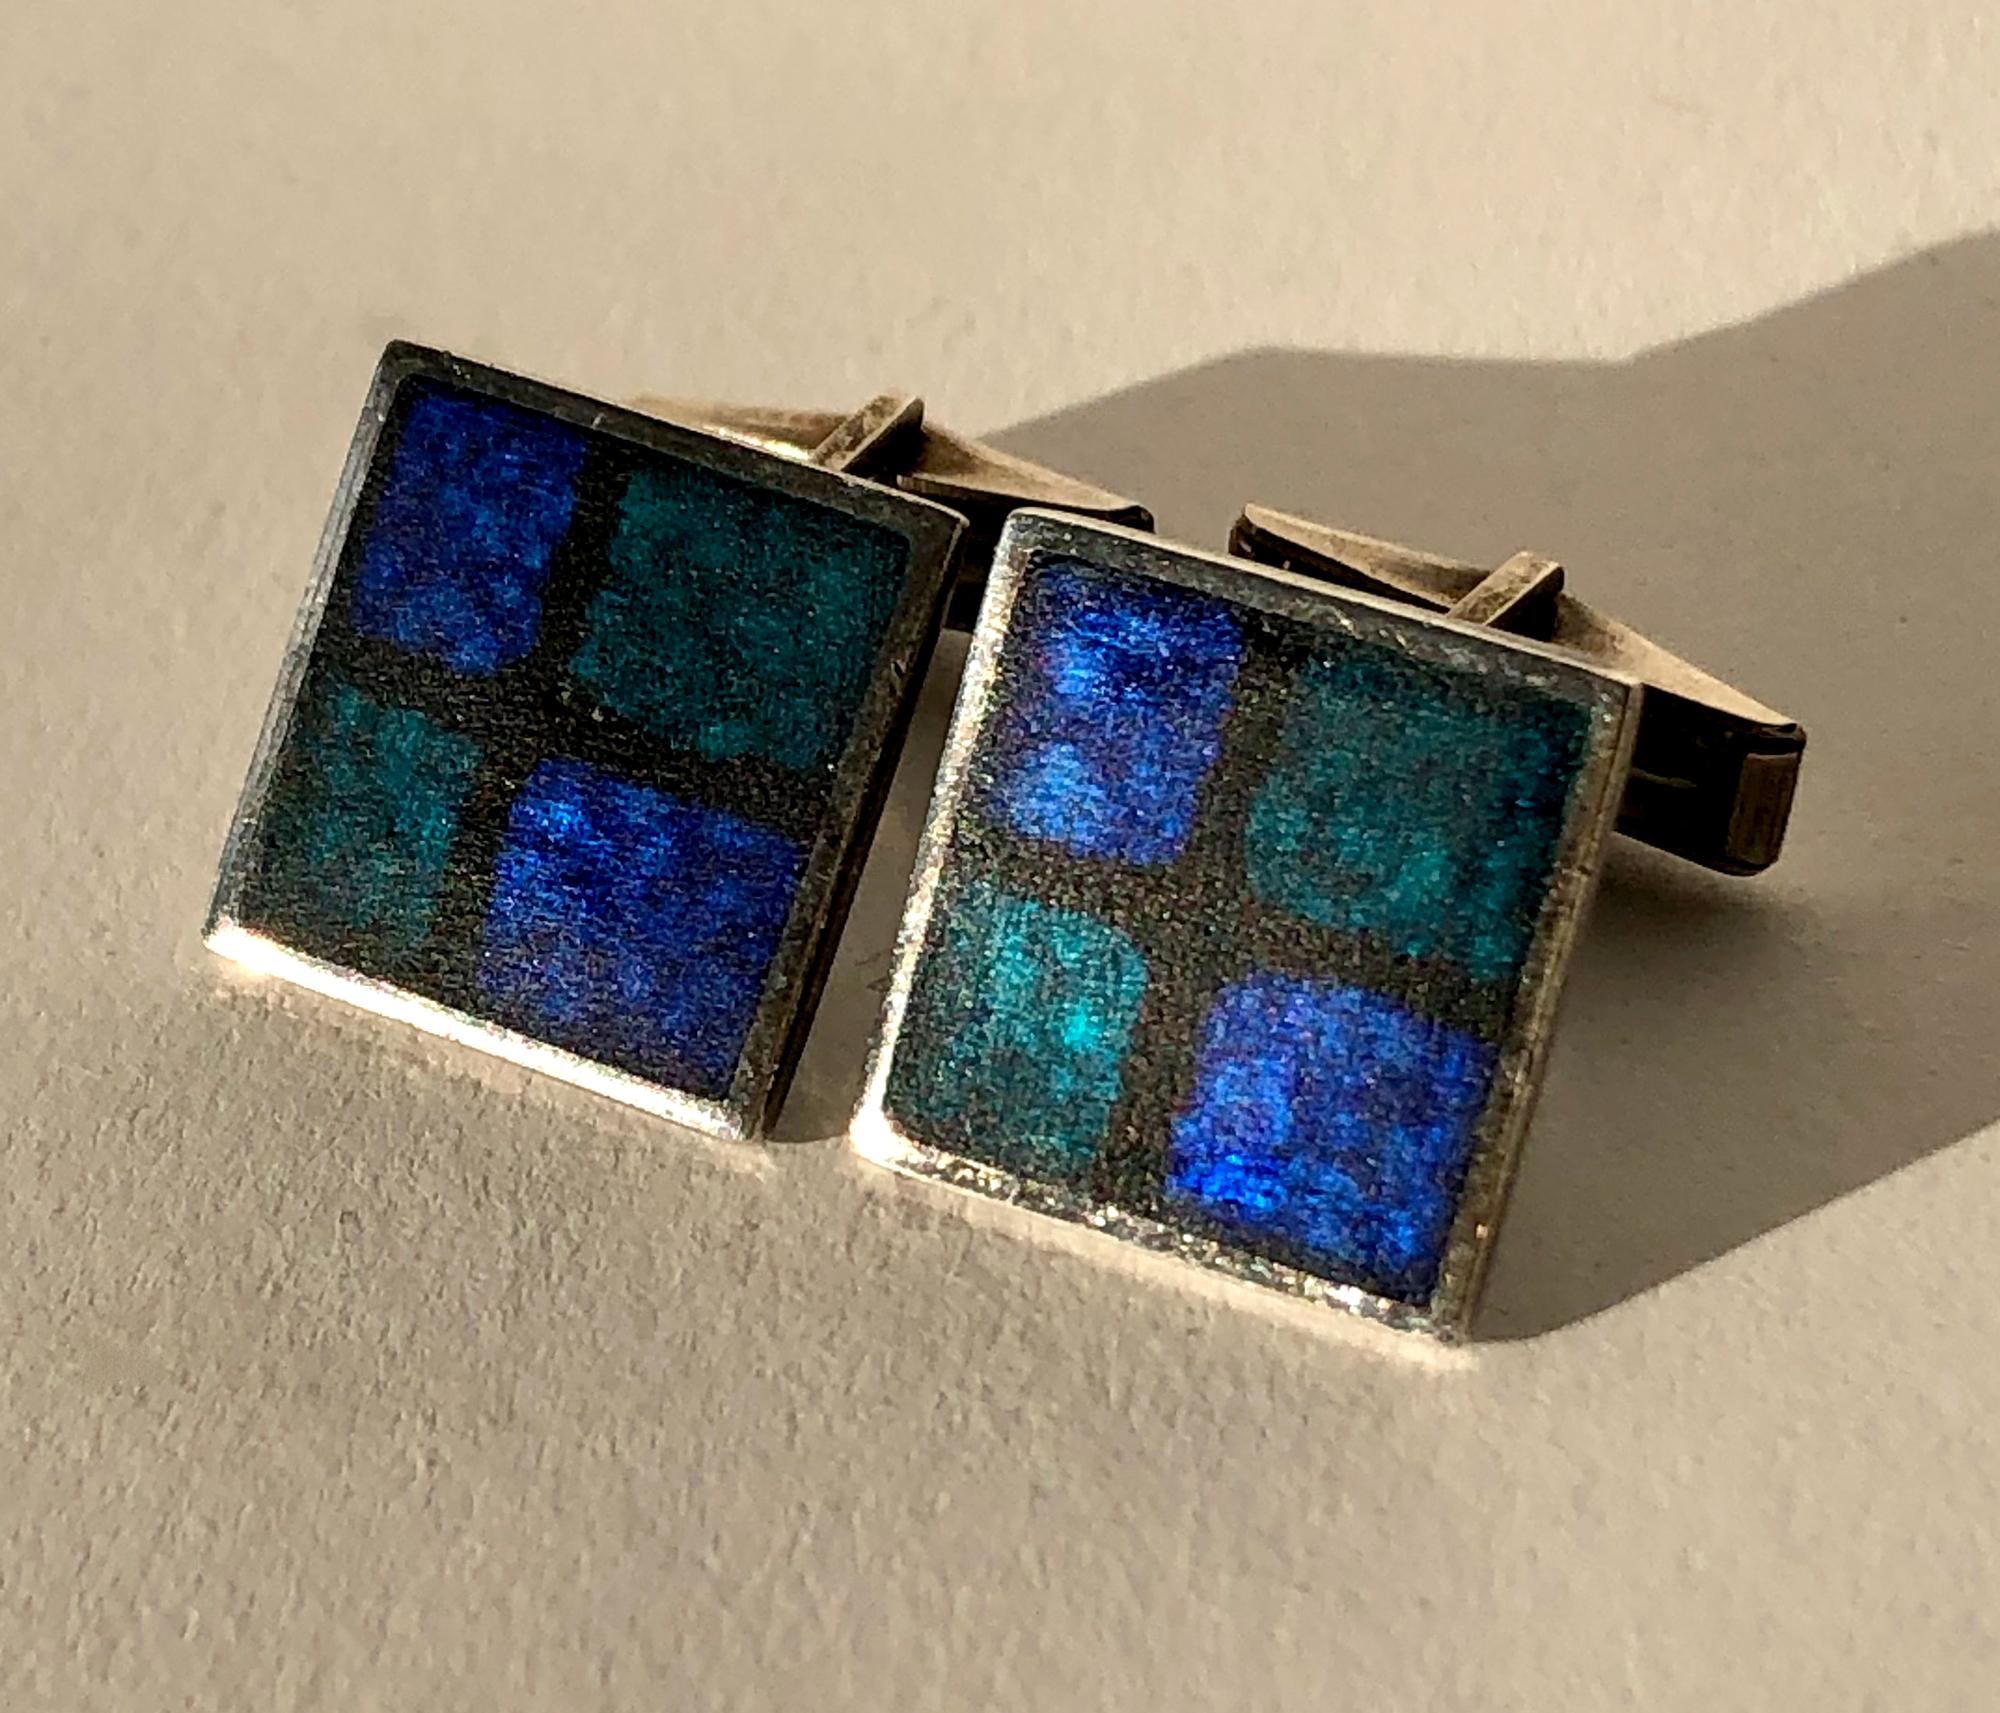 Pair of German modernist silver and enamel cufflinks designed by Perli, circa 1950s.  Dark blue grid cufflinks have counter enamel in black.  The measure about .75